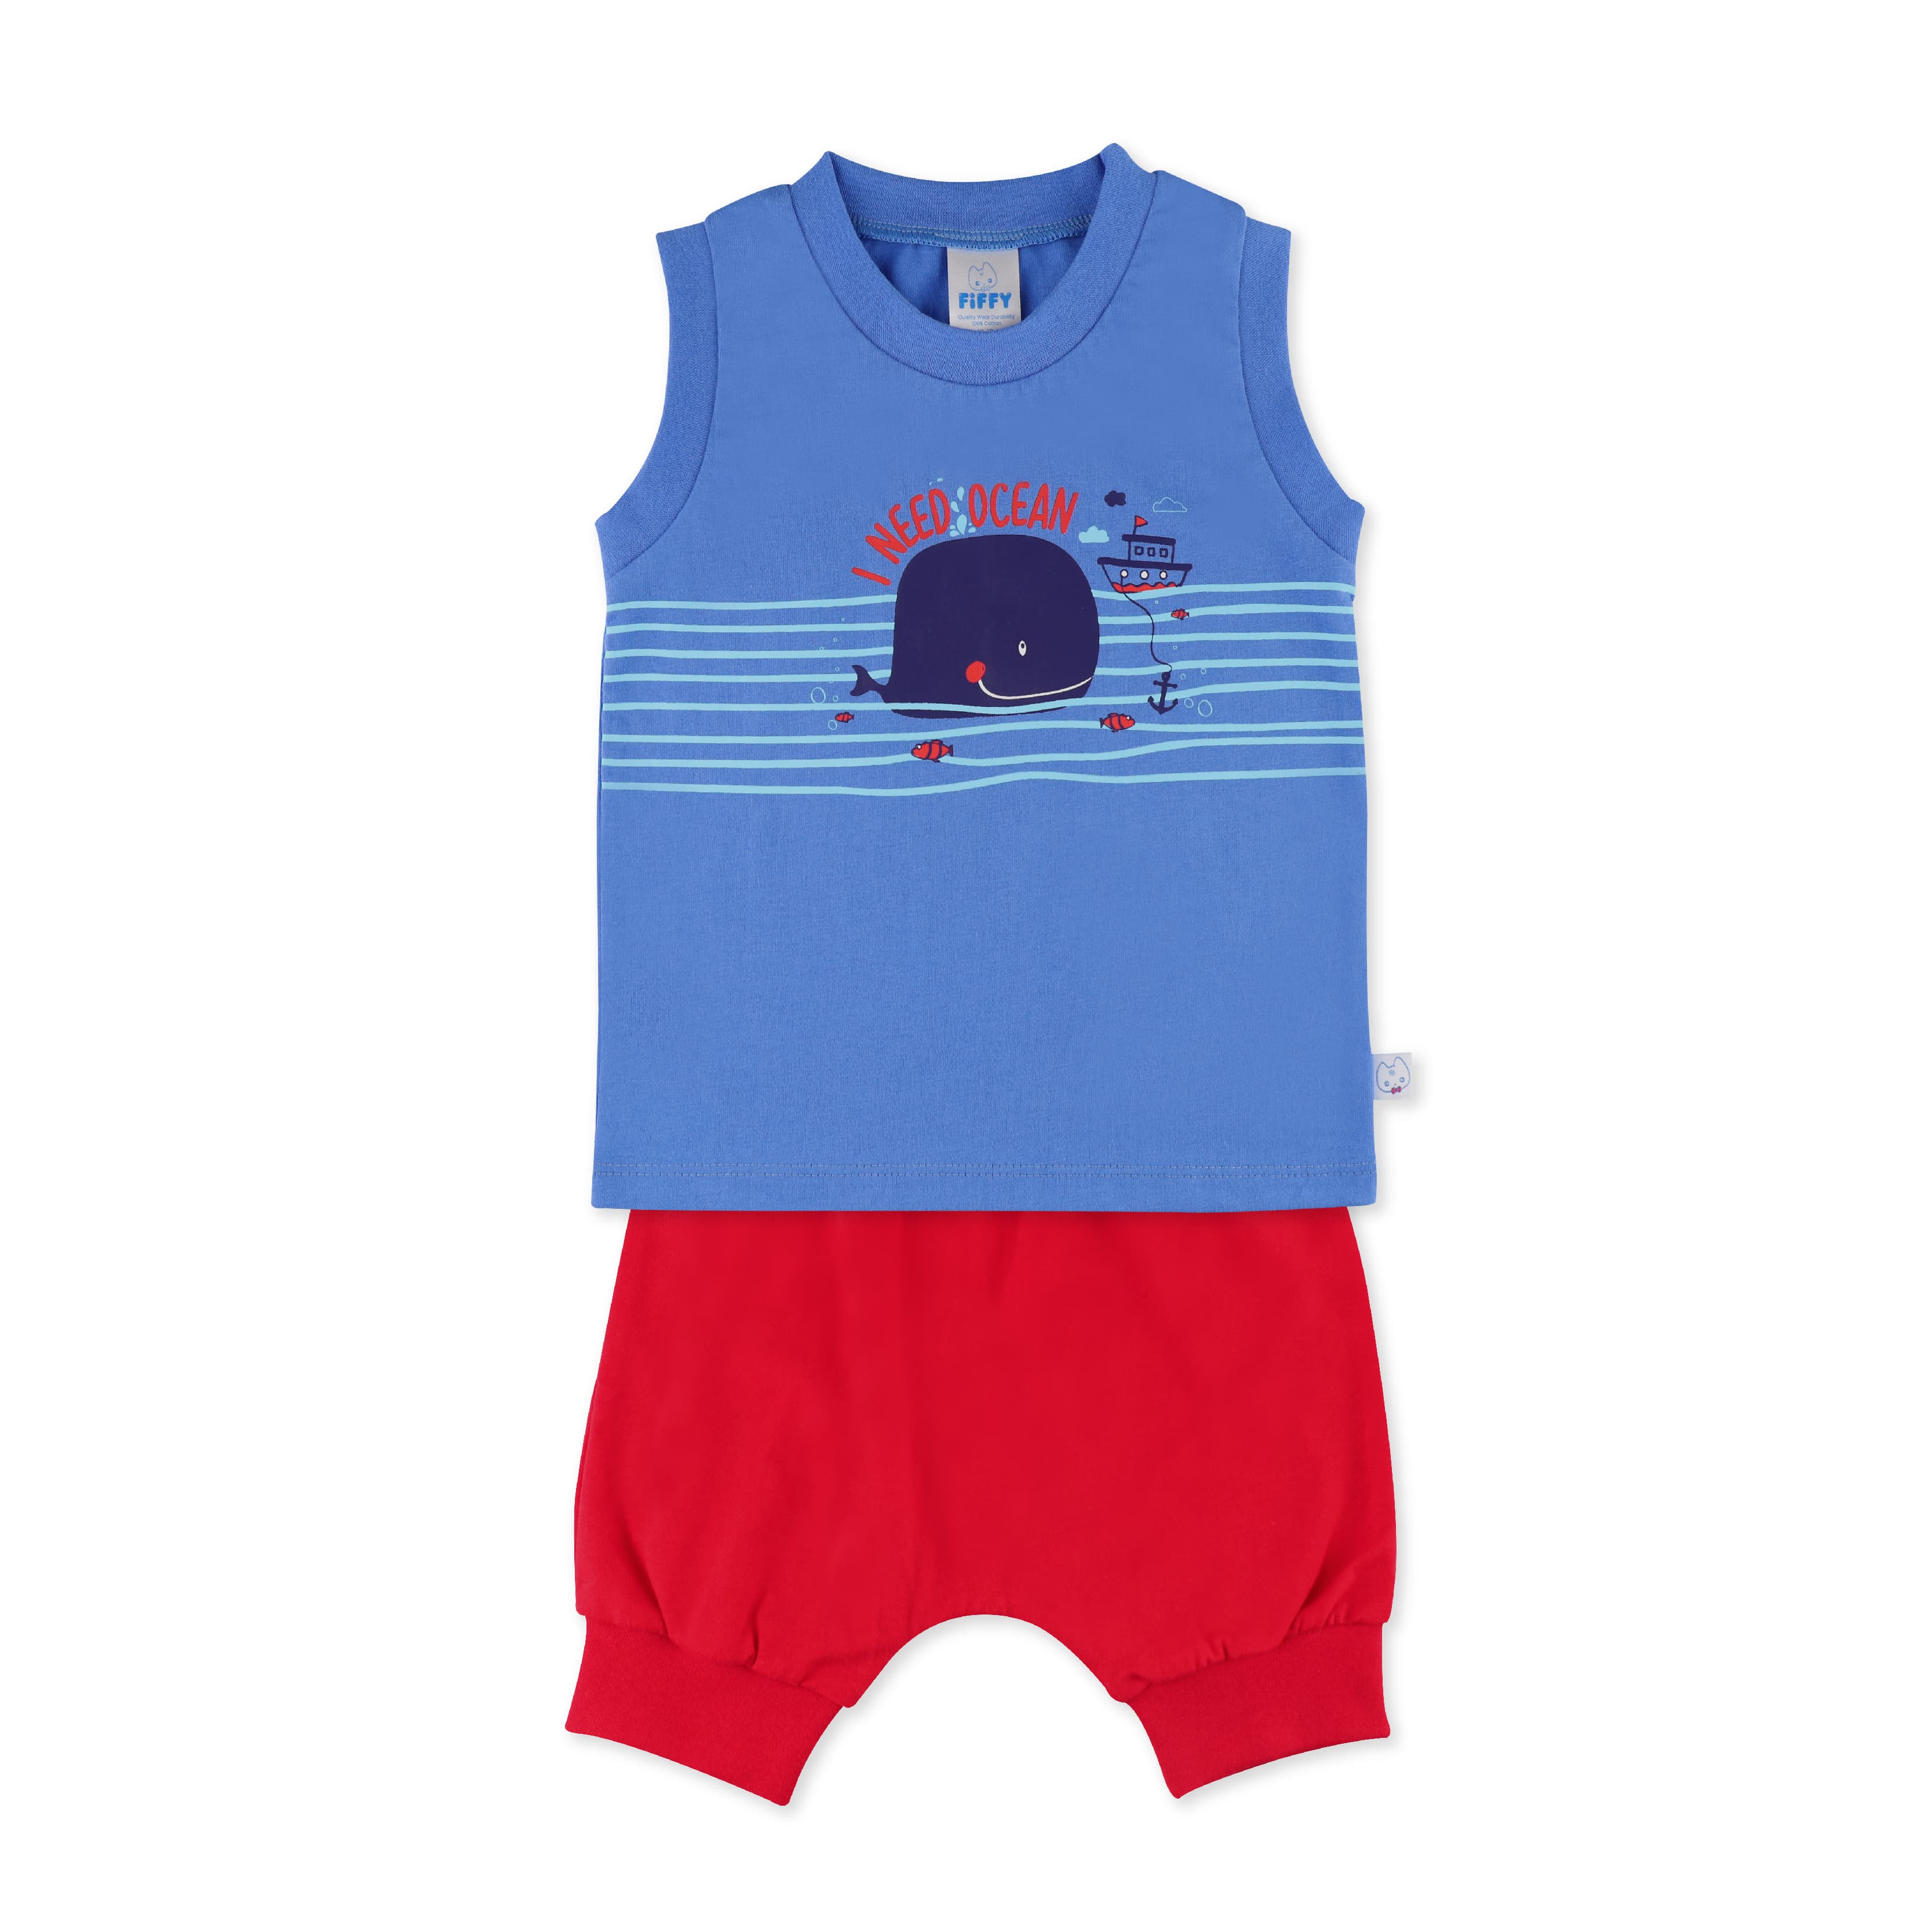 FIFFY SWIMMING WHALE TANK TOP SUIT